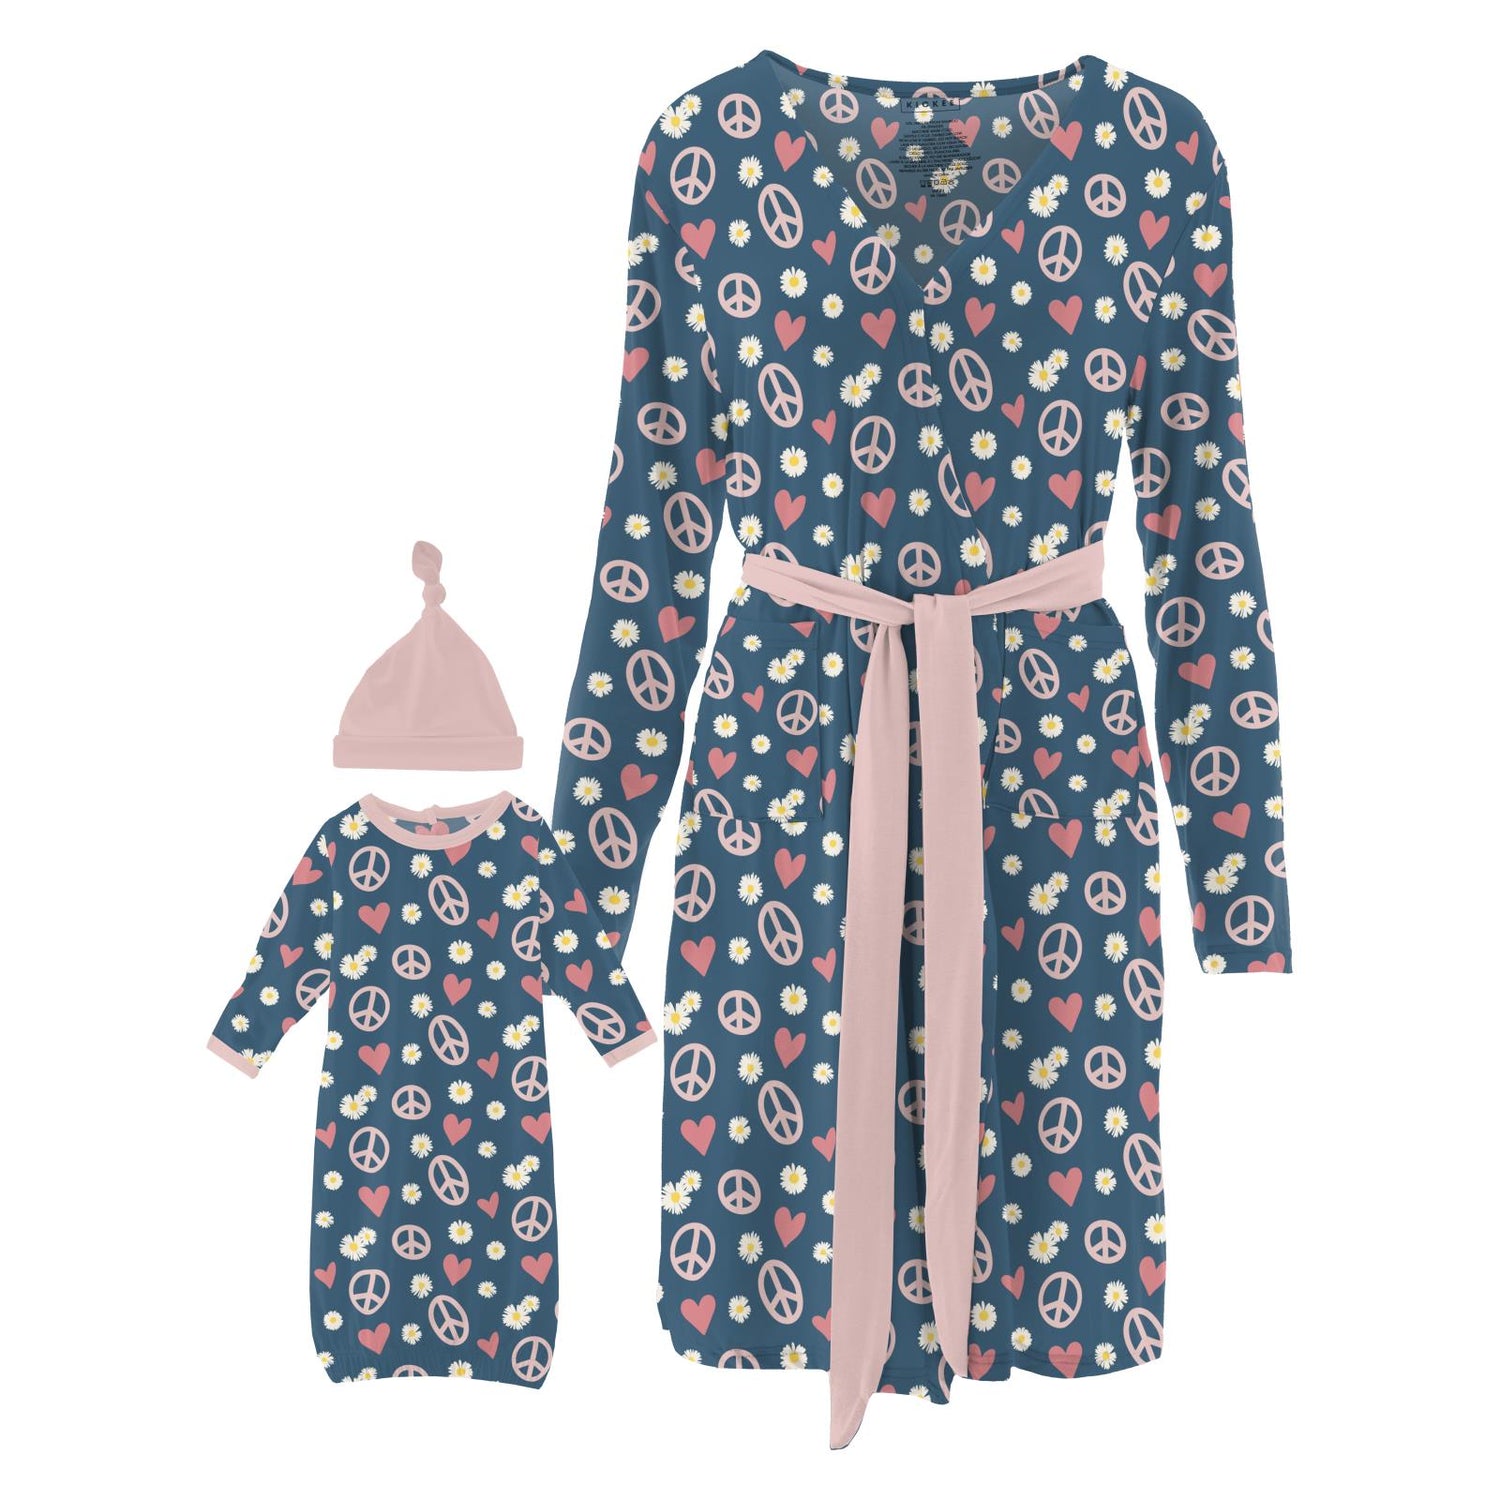 Women's Print Mid Length Lounge Robe & Layette Gown Set in Peace, Love and Happiness